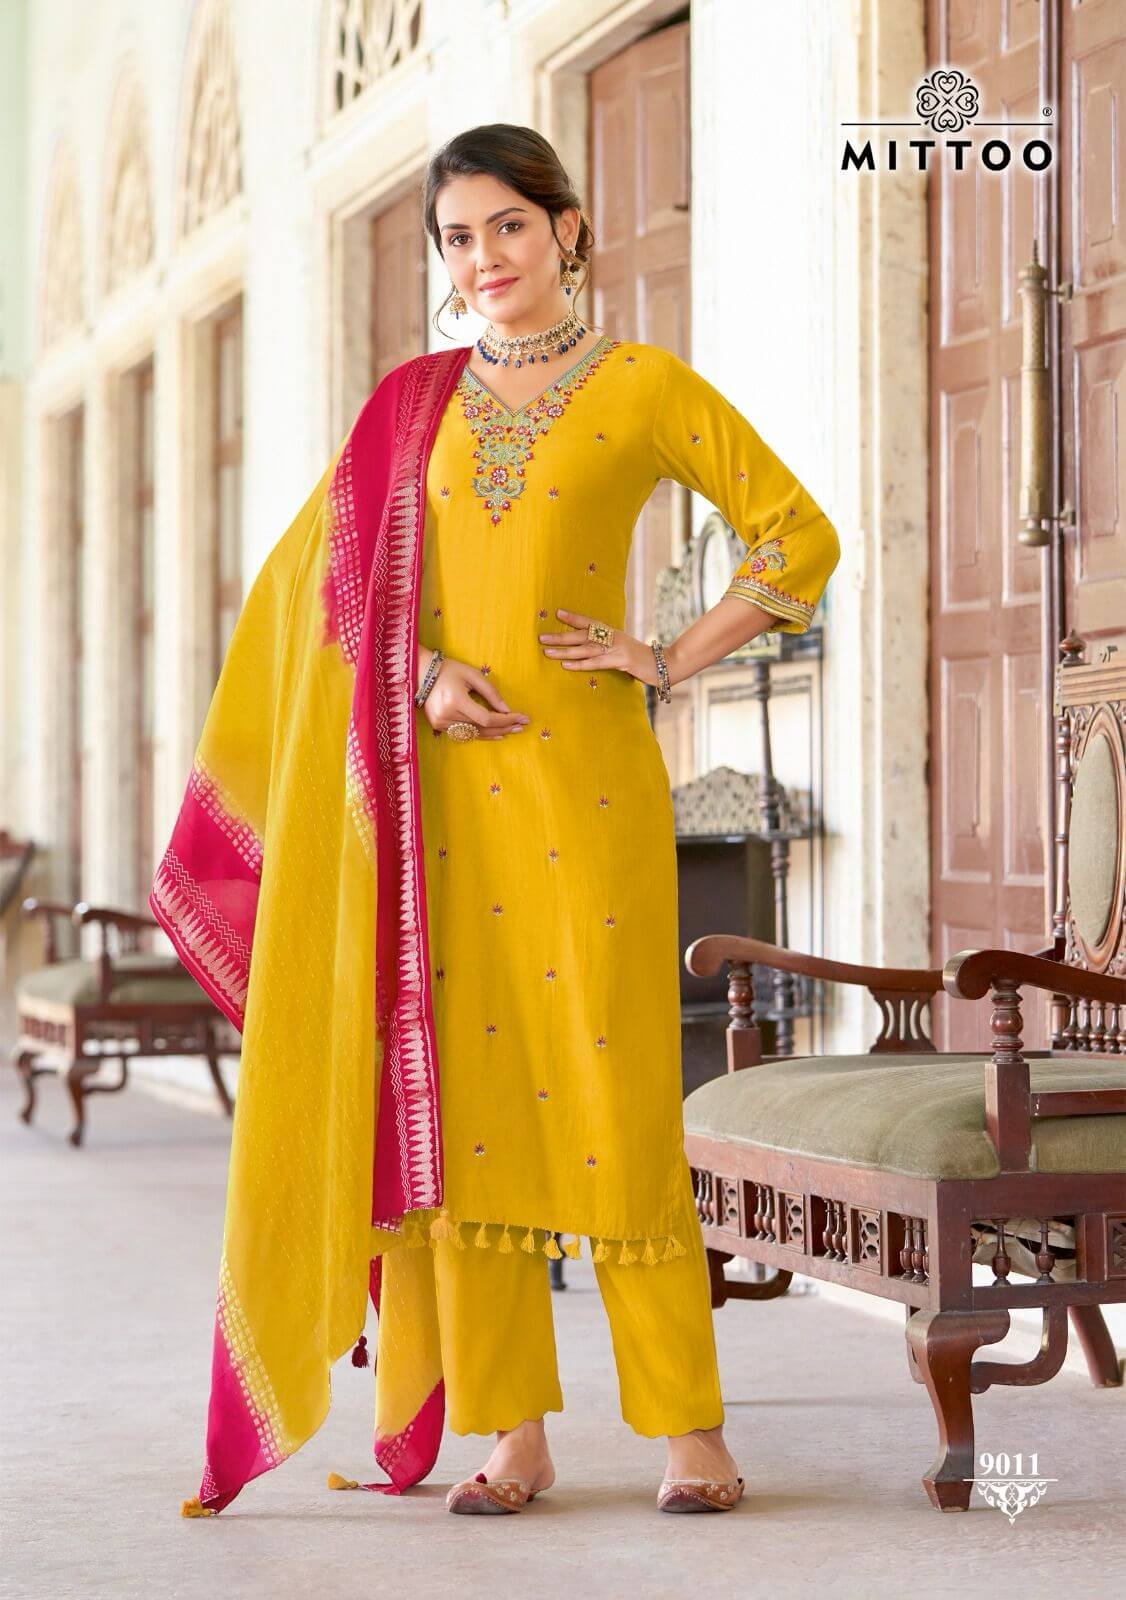 Mittoo Mosam Vol 2 Embroidery Salwar Kameez Catalog collection 2